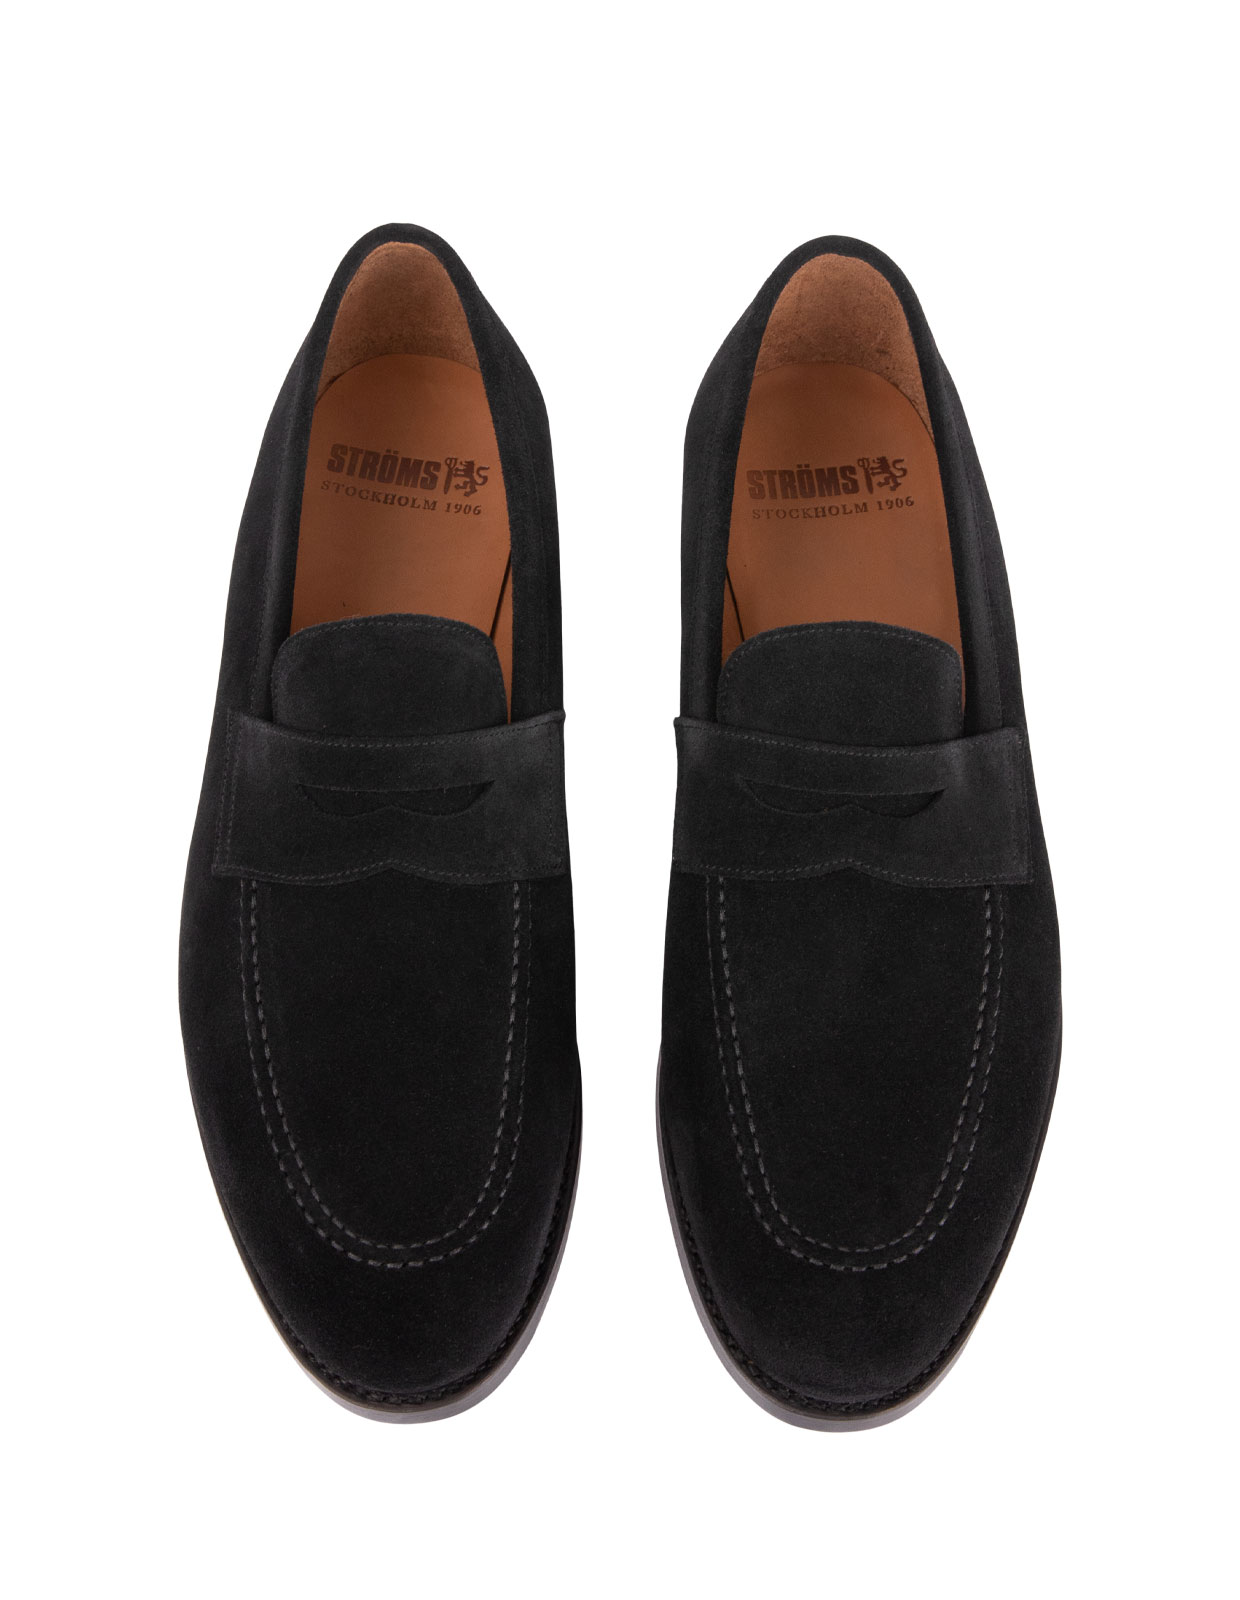 Penny Loafers Suede Black Stl 9